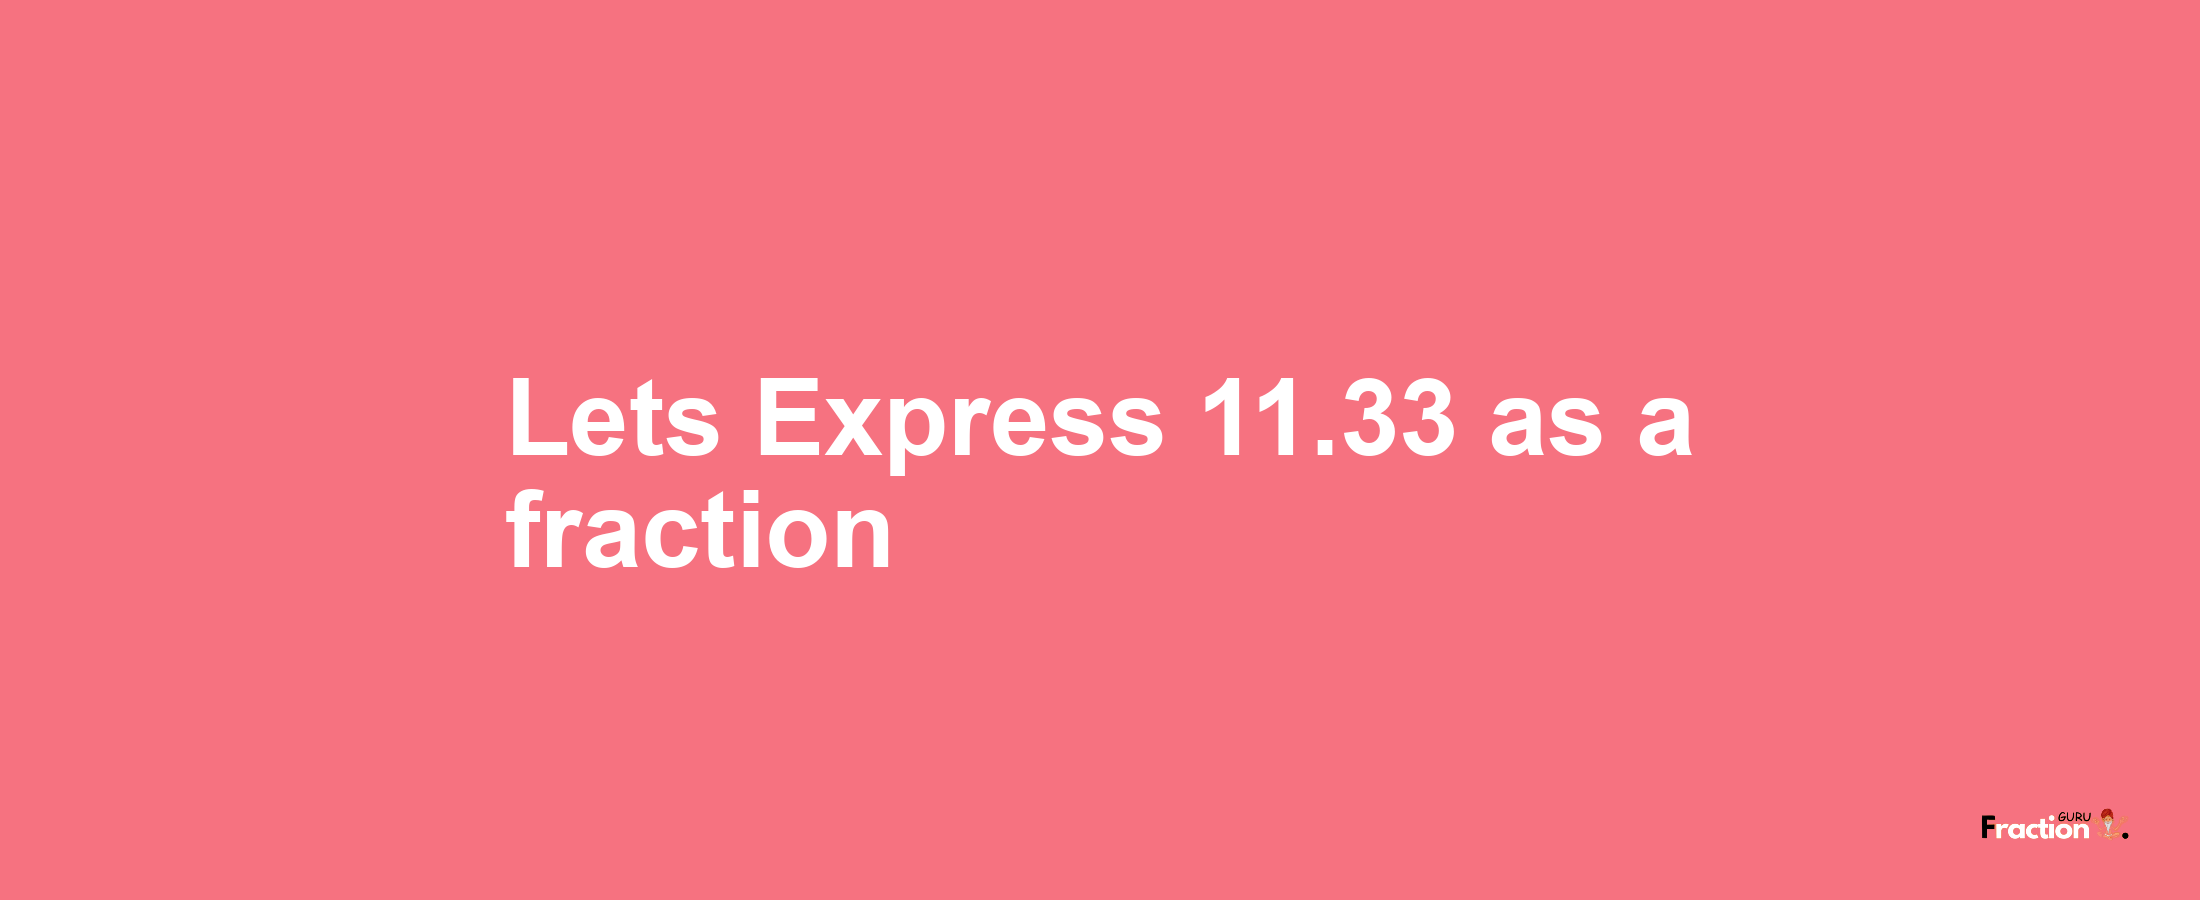 Lets Express 11.33 as afraction